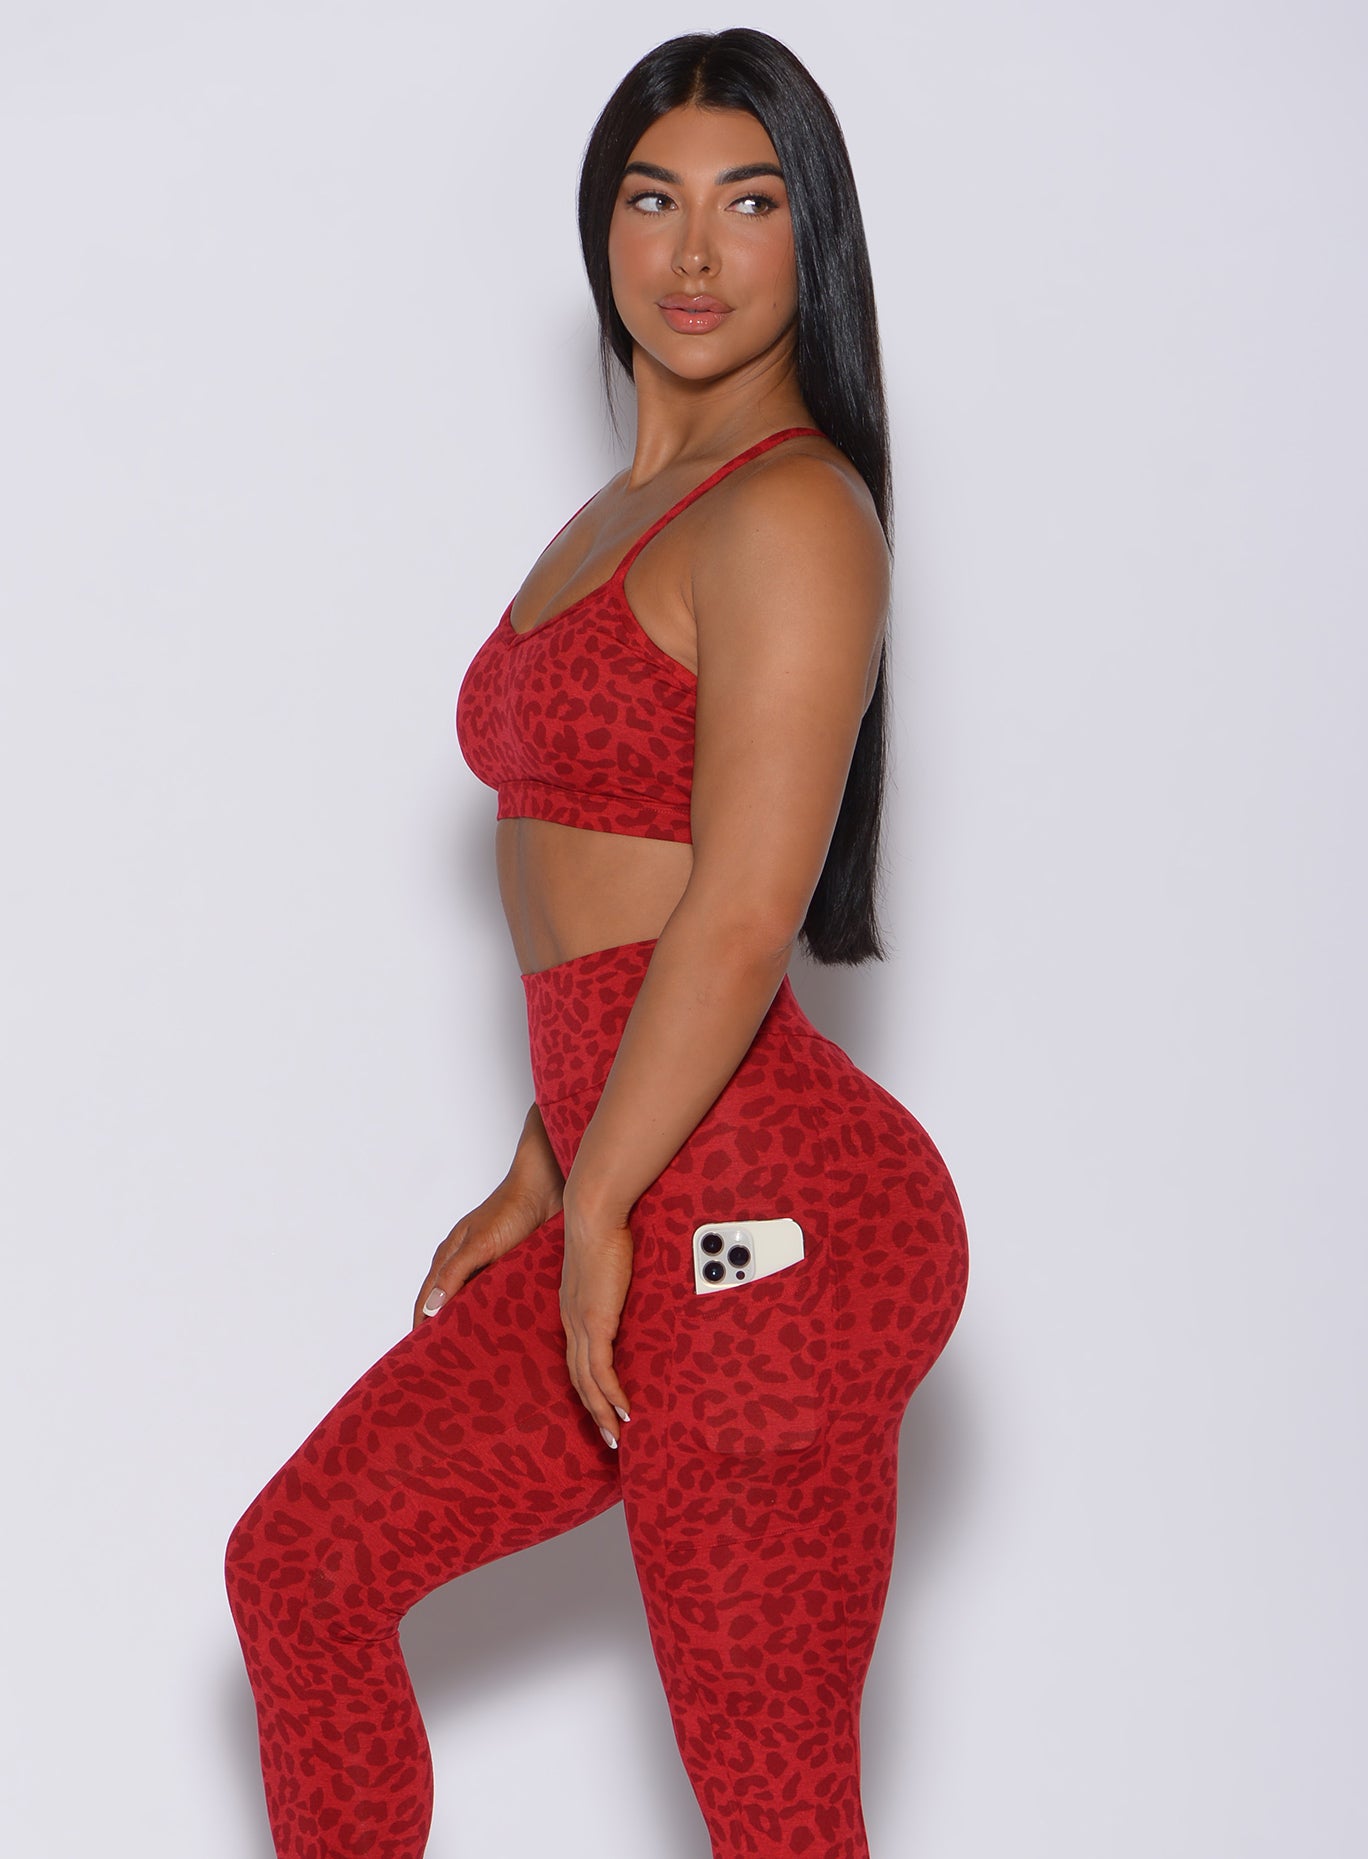 Left side profile view of a model in our pumped sports bra in red cheetah color and matching leggings